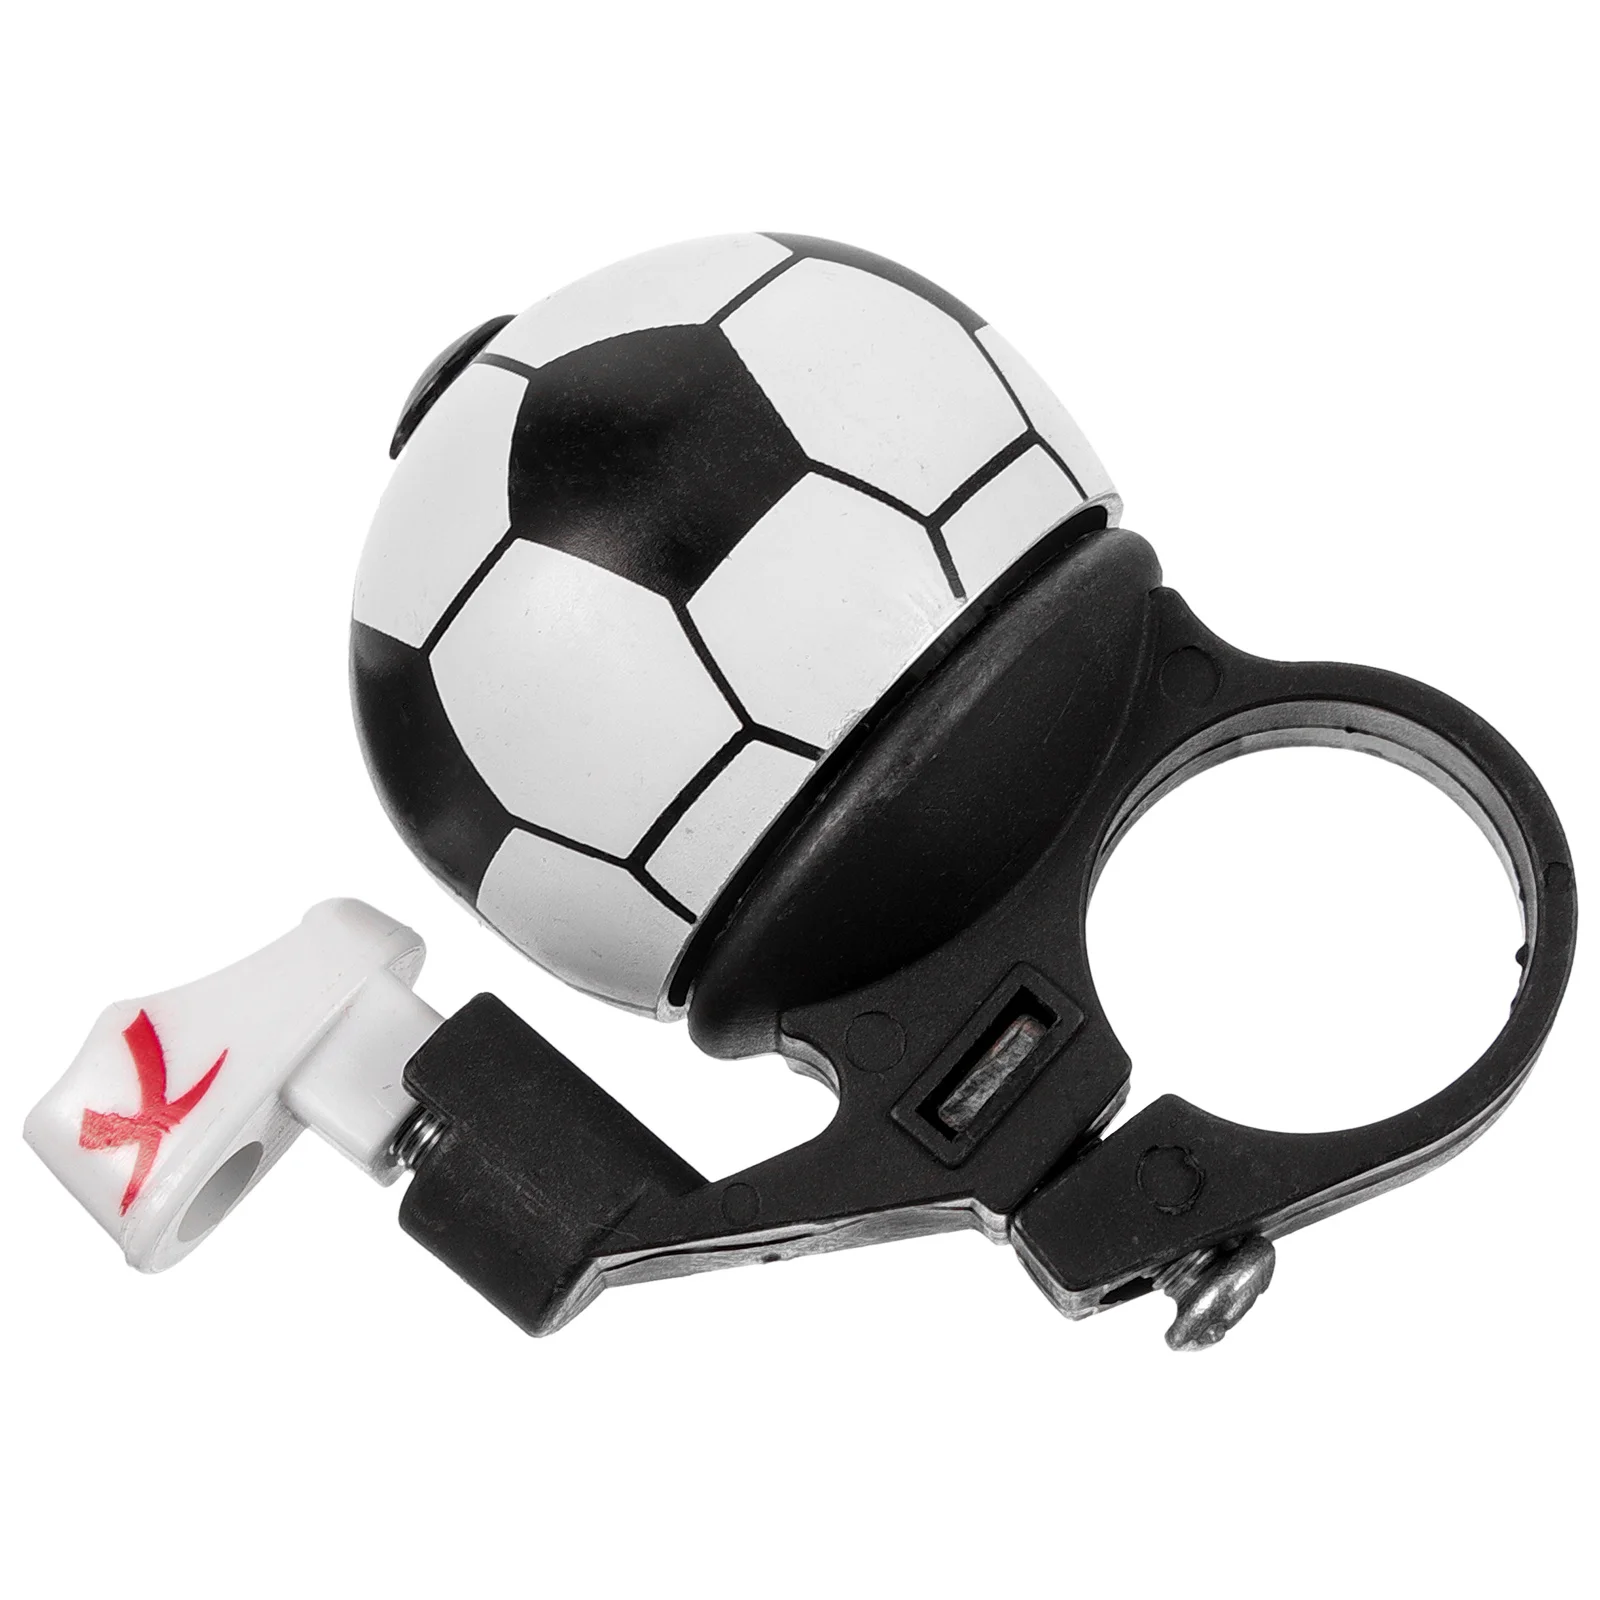 

Multi-function Bike Bell Convenient Bicycles Bell Football Shaped Cycling Bell Bike Accessory (Random Style)